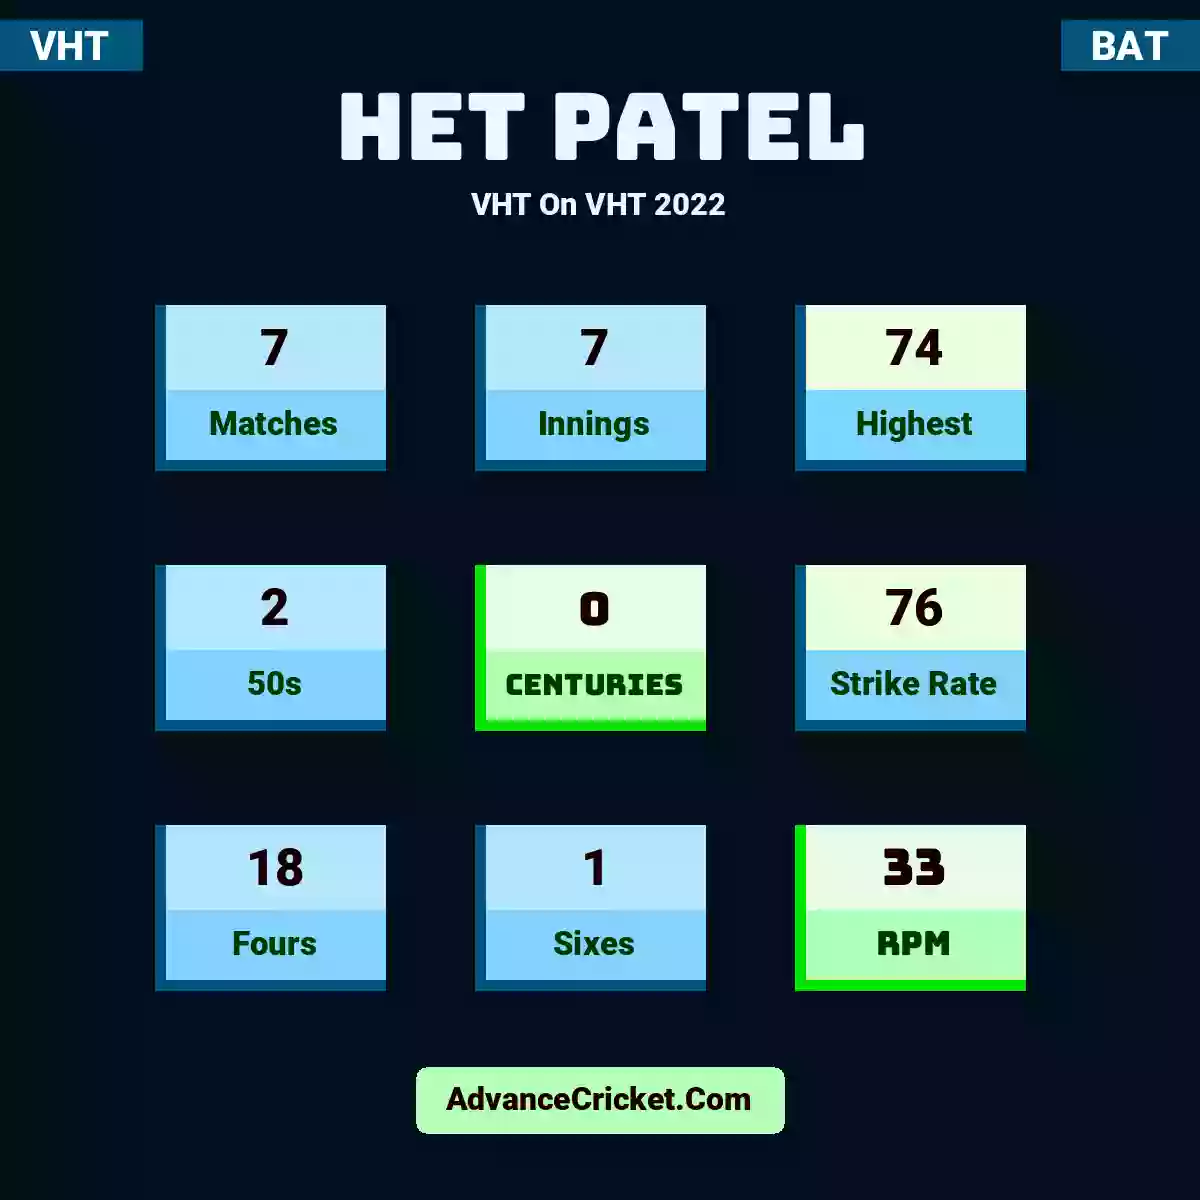 Het Patel VHT  On VHT 2022, Het Patel played 7 matches, scored 74 runs as highest, 2 half-centuries, and 0 centuries, with a strike rate of 76. H.Patel hit 18 fours and 1 sixes, with an RPM of 33.